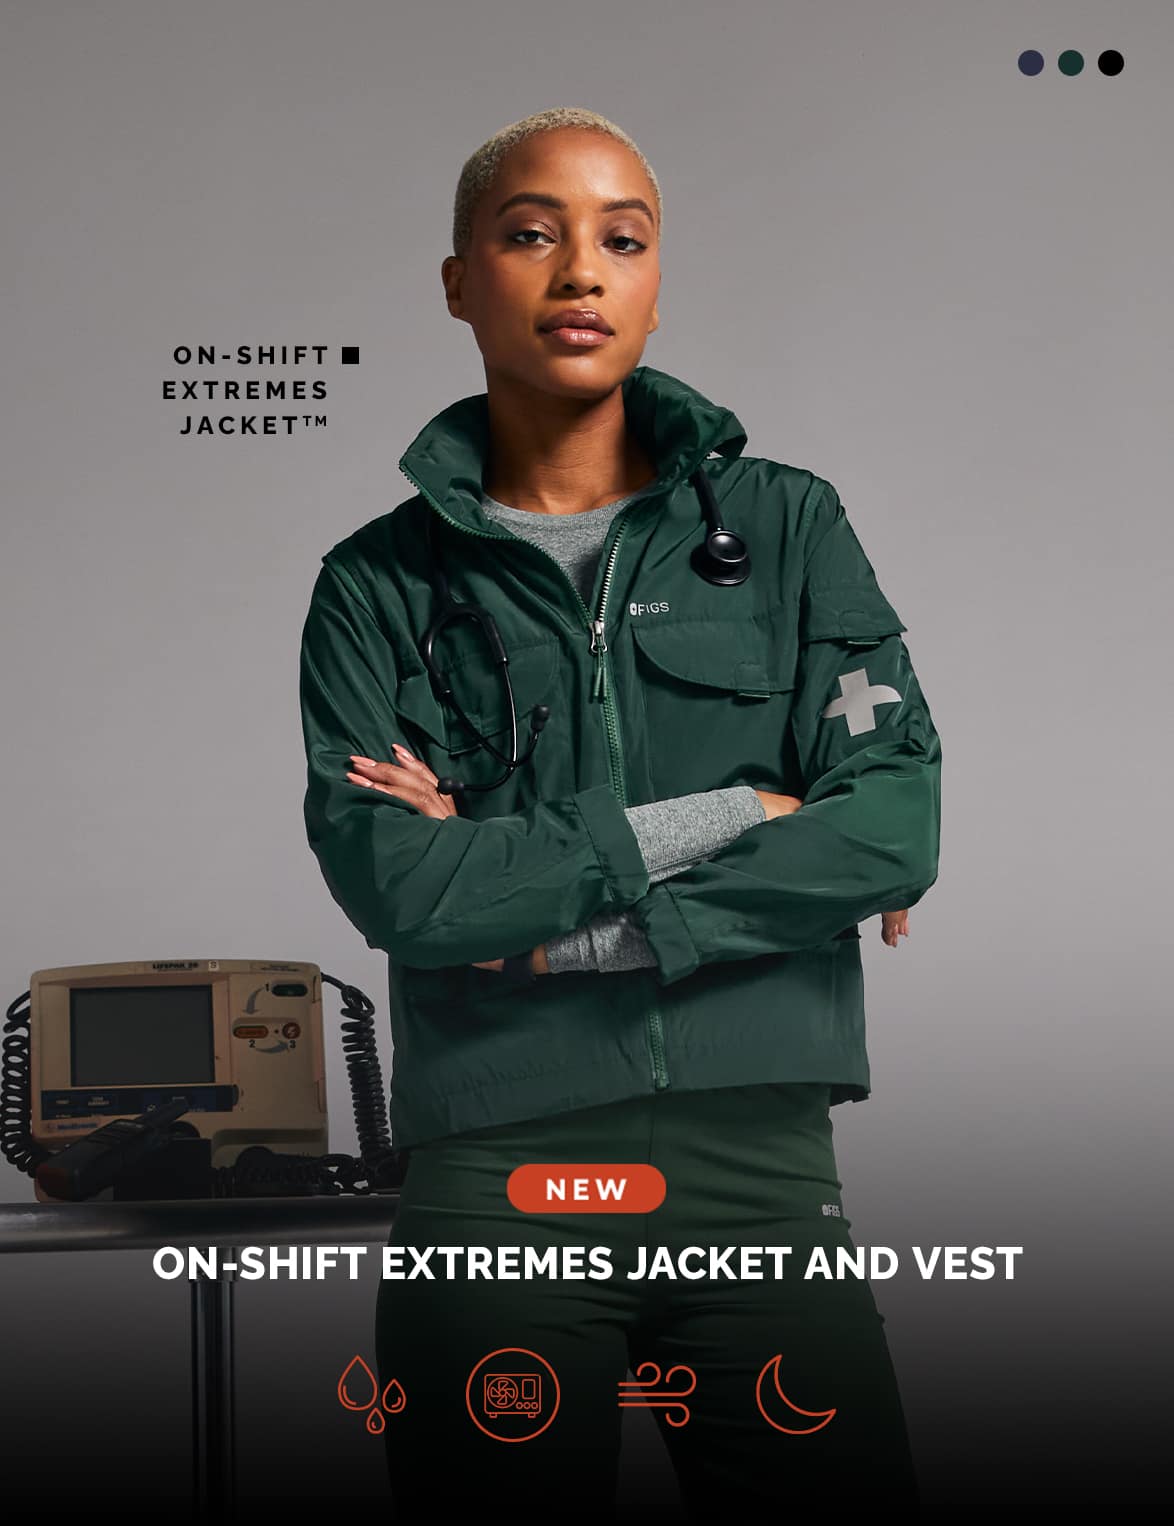 NEW On-Shift Extremes Jacket and Vest — built to help you withstand the elements while you’re in your element.